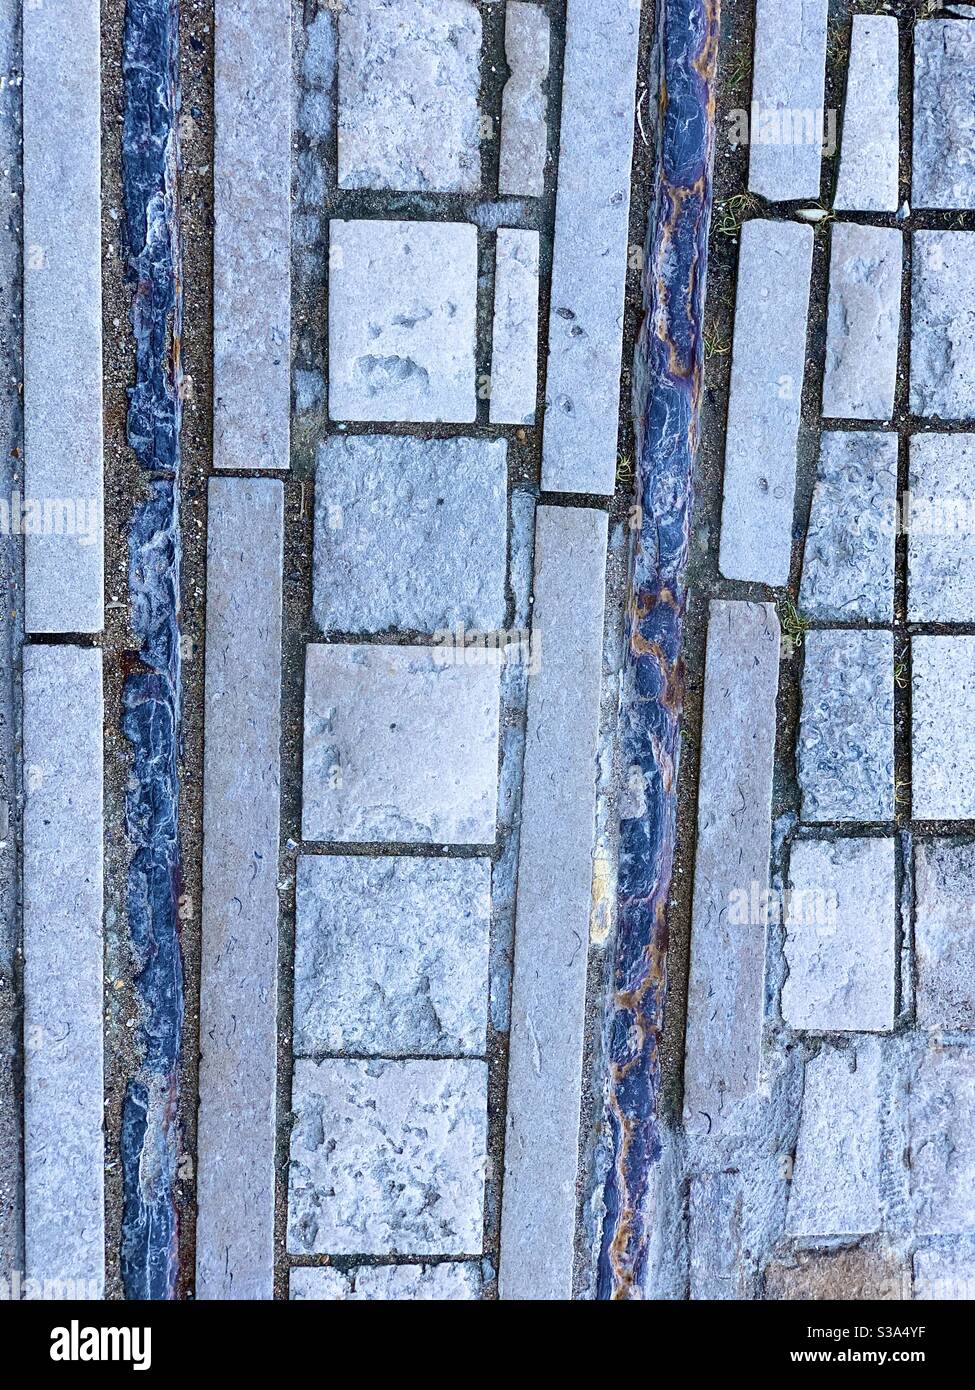 Stone paving pattern with blue and gray tones. Stock Photo